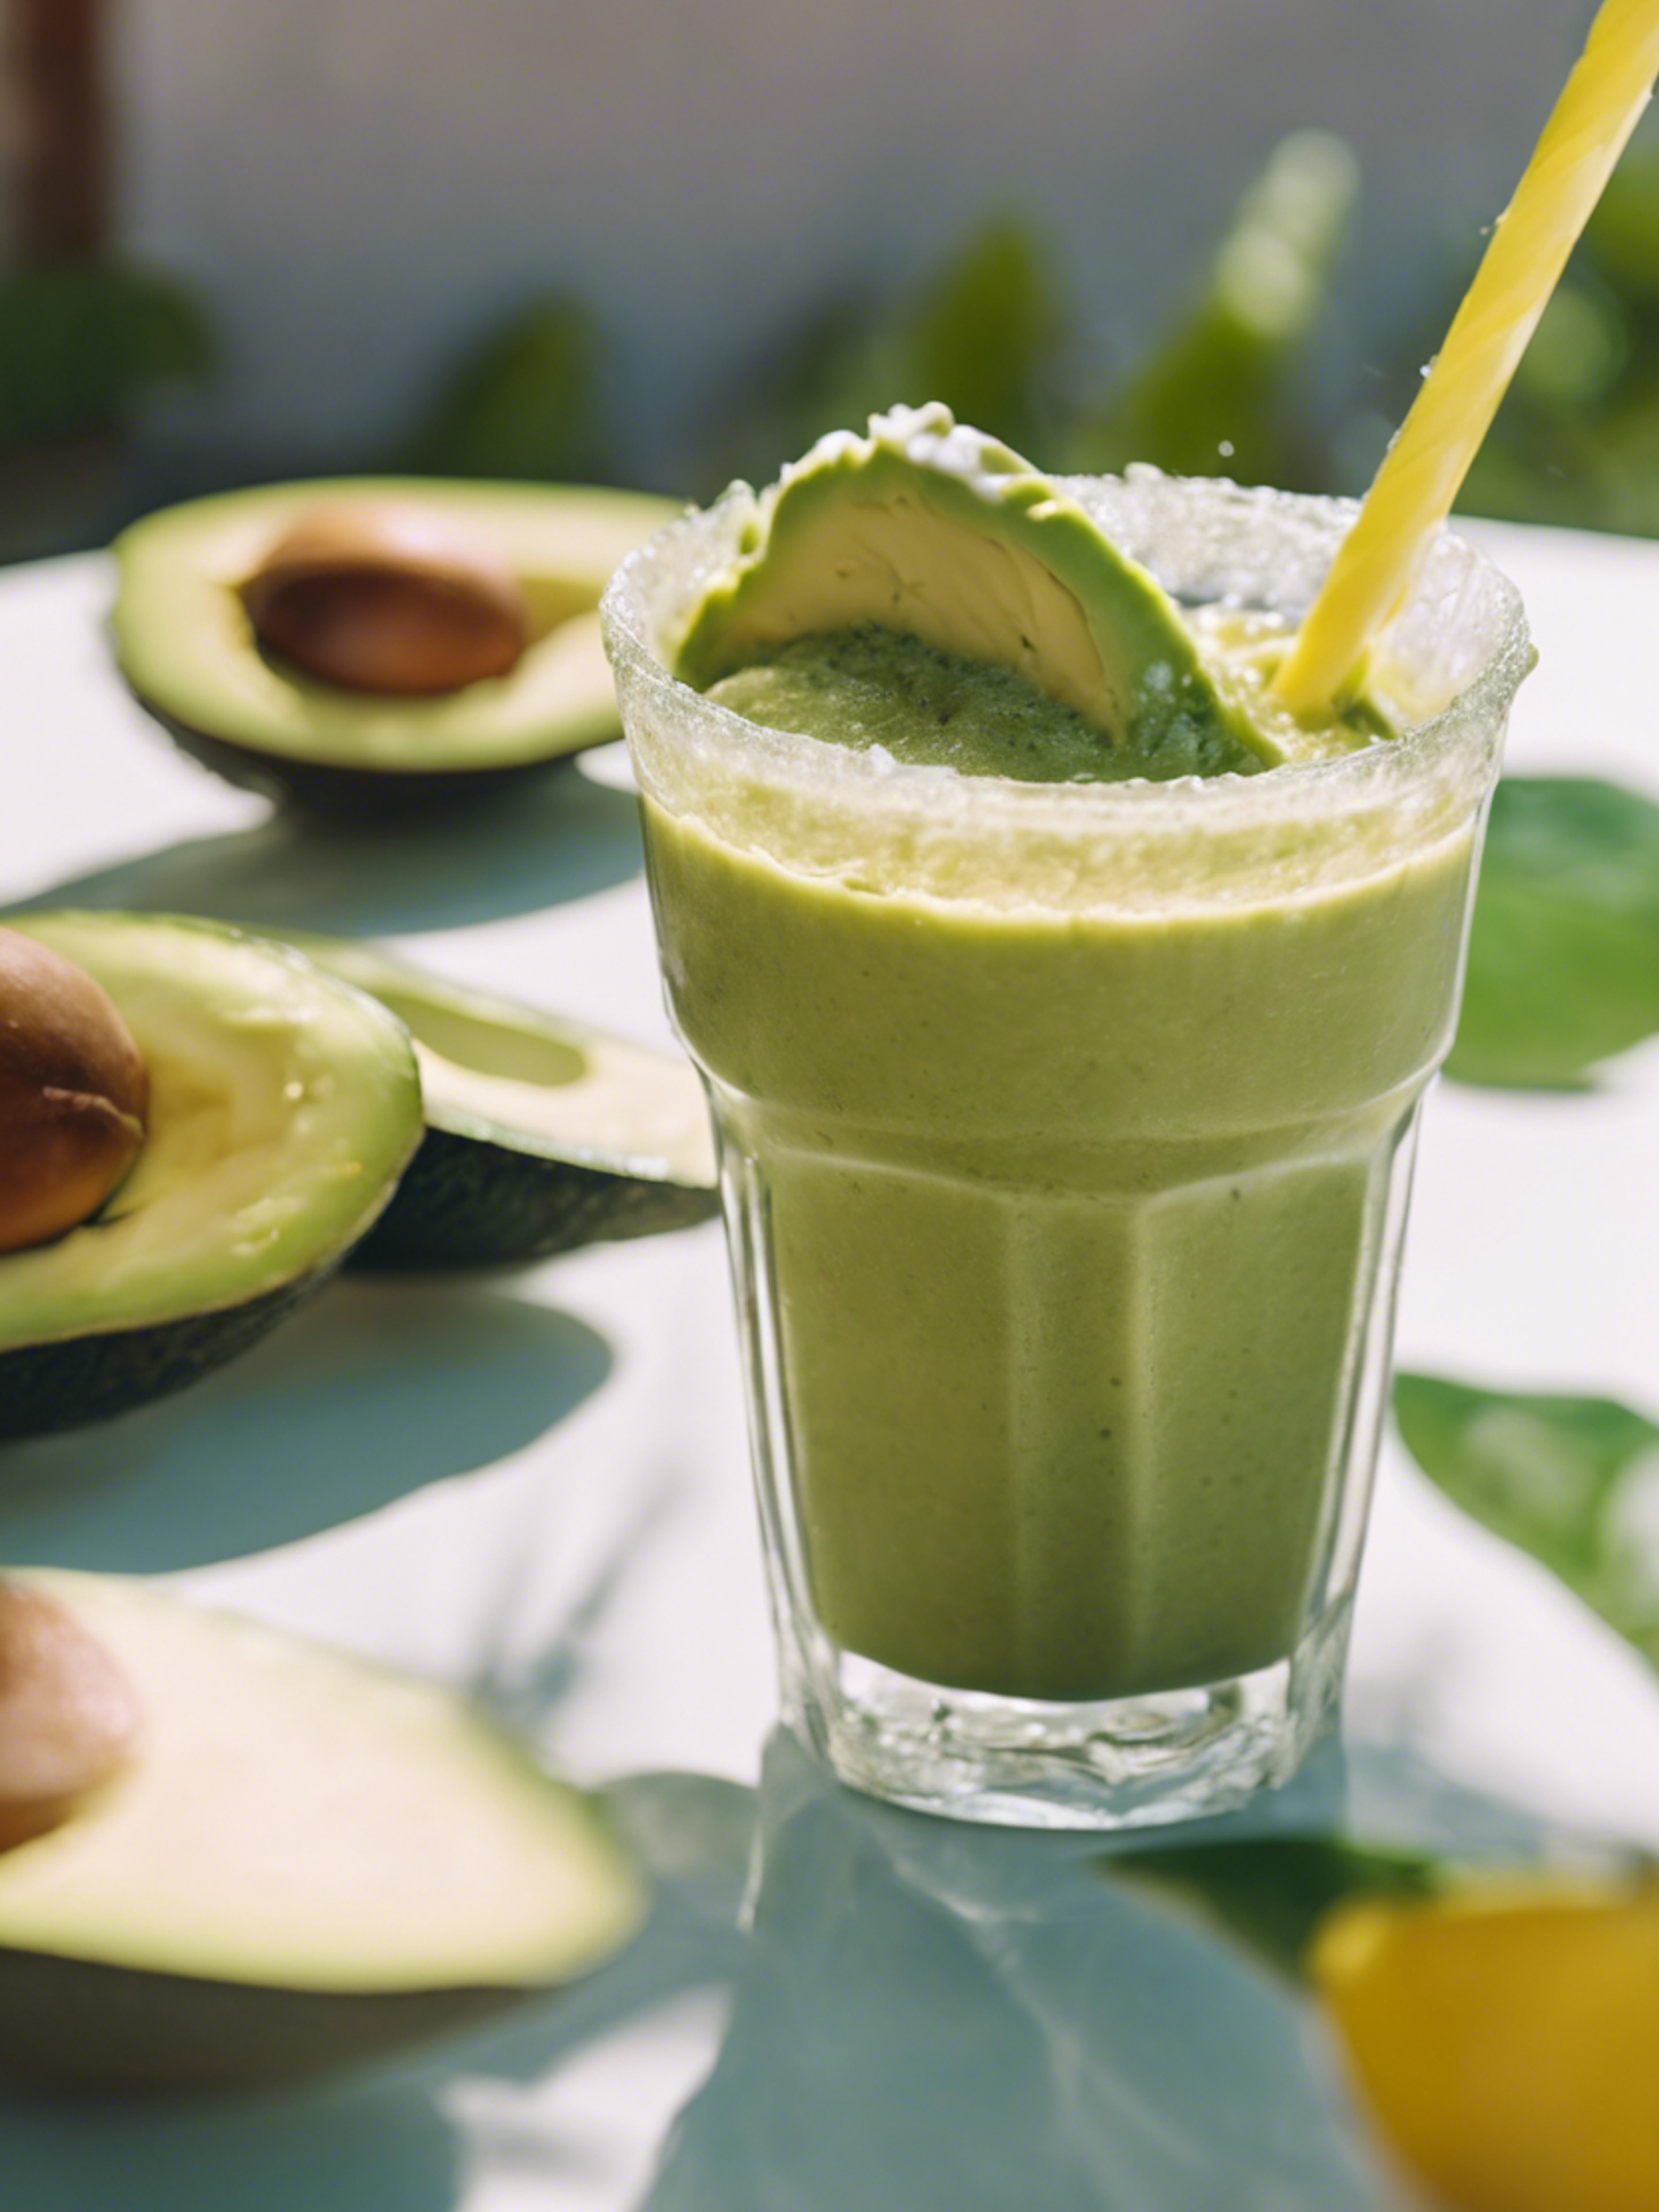 A playful avocado sipping on tropical smoothie on a hot summer day 牆紙[3b128a2f6f1a4fb38d08]